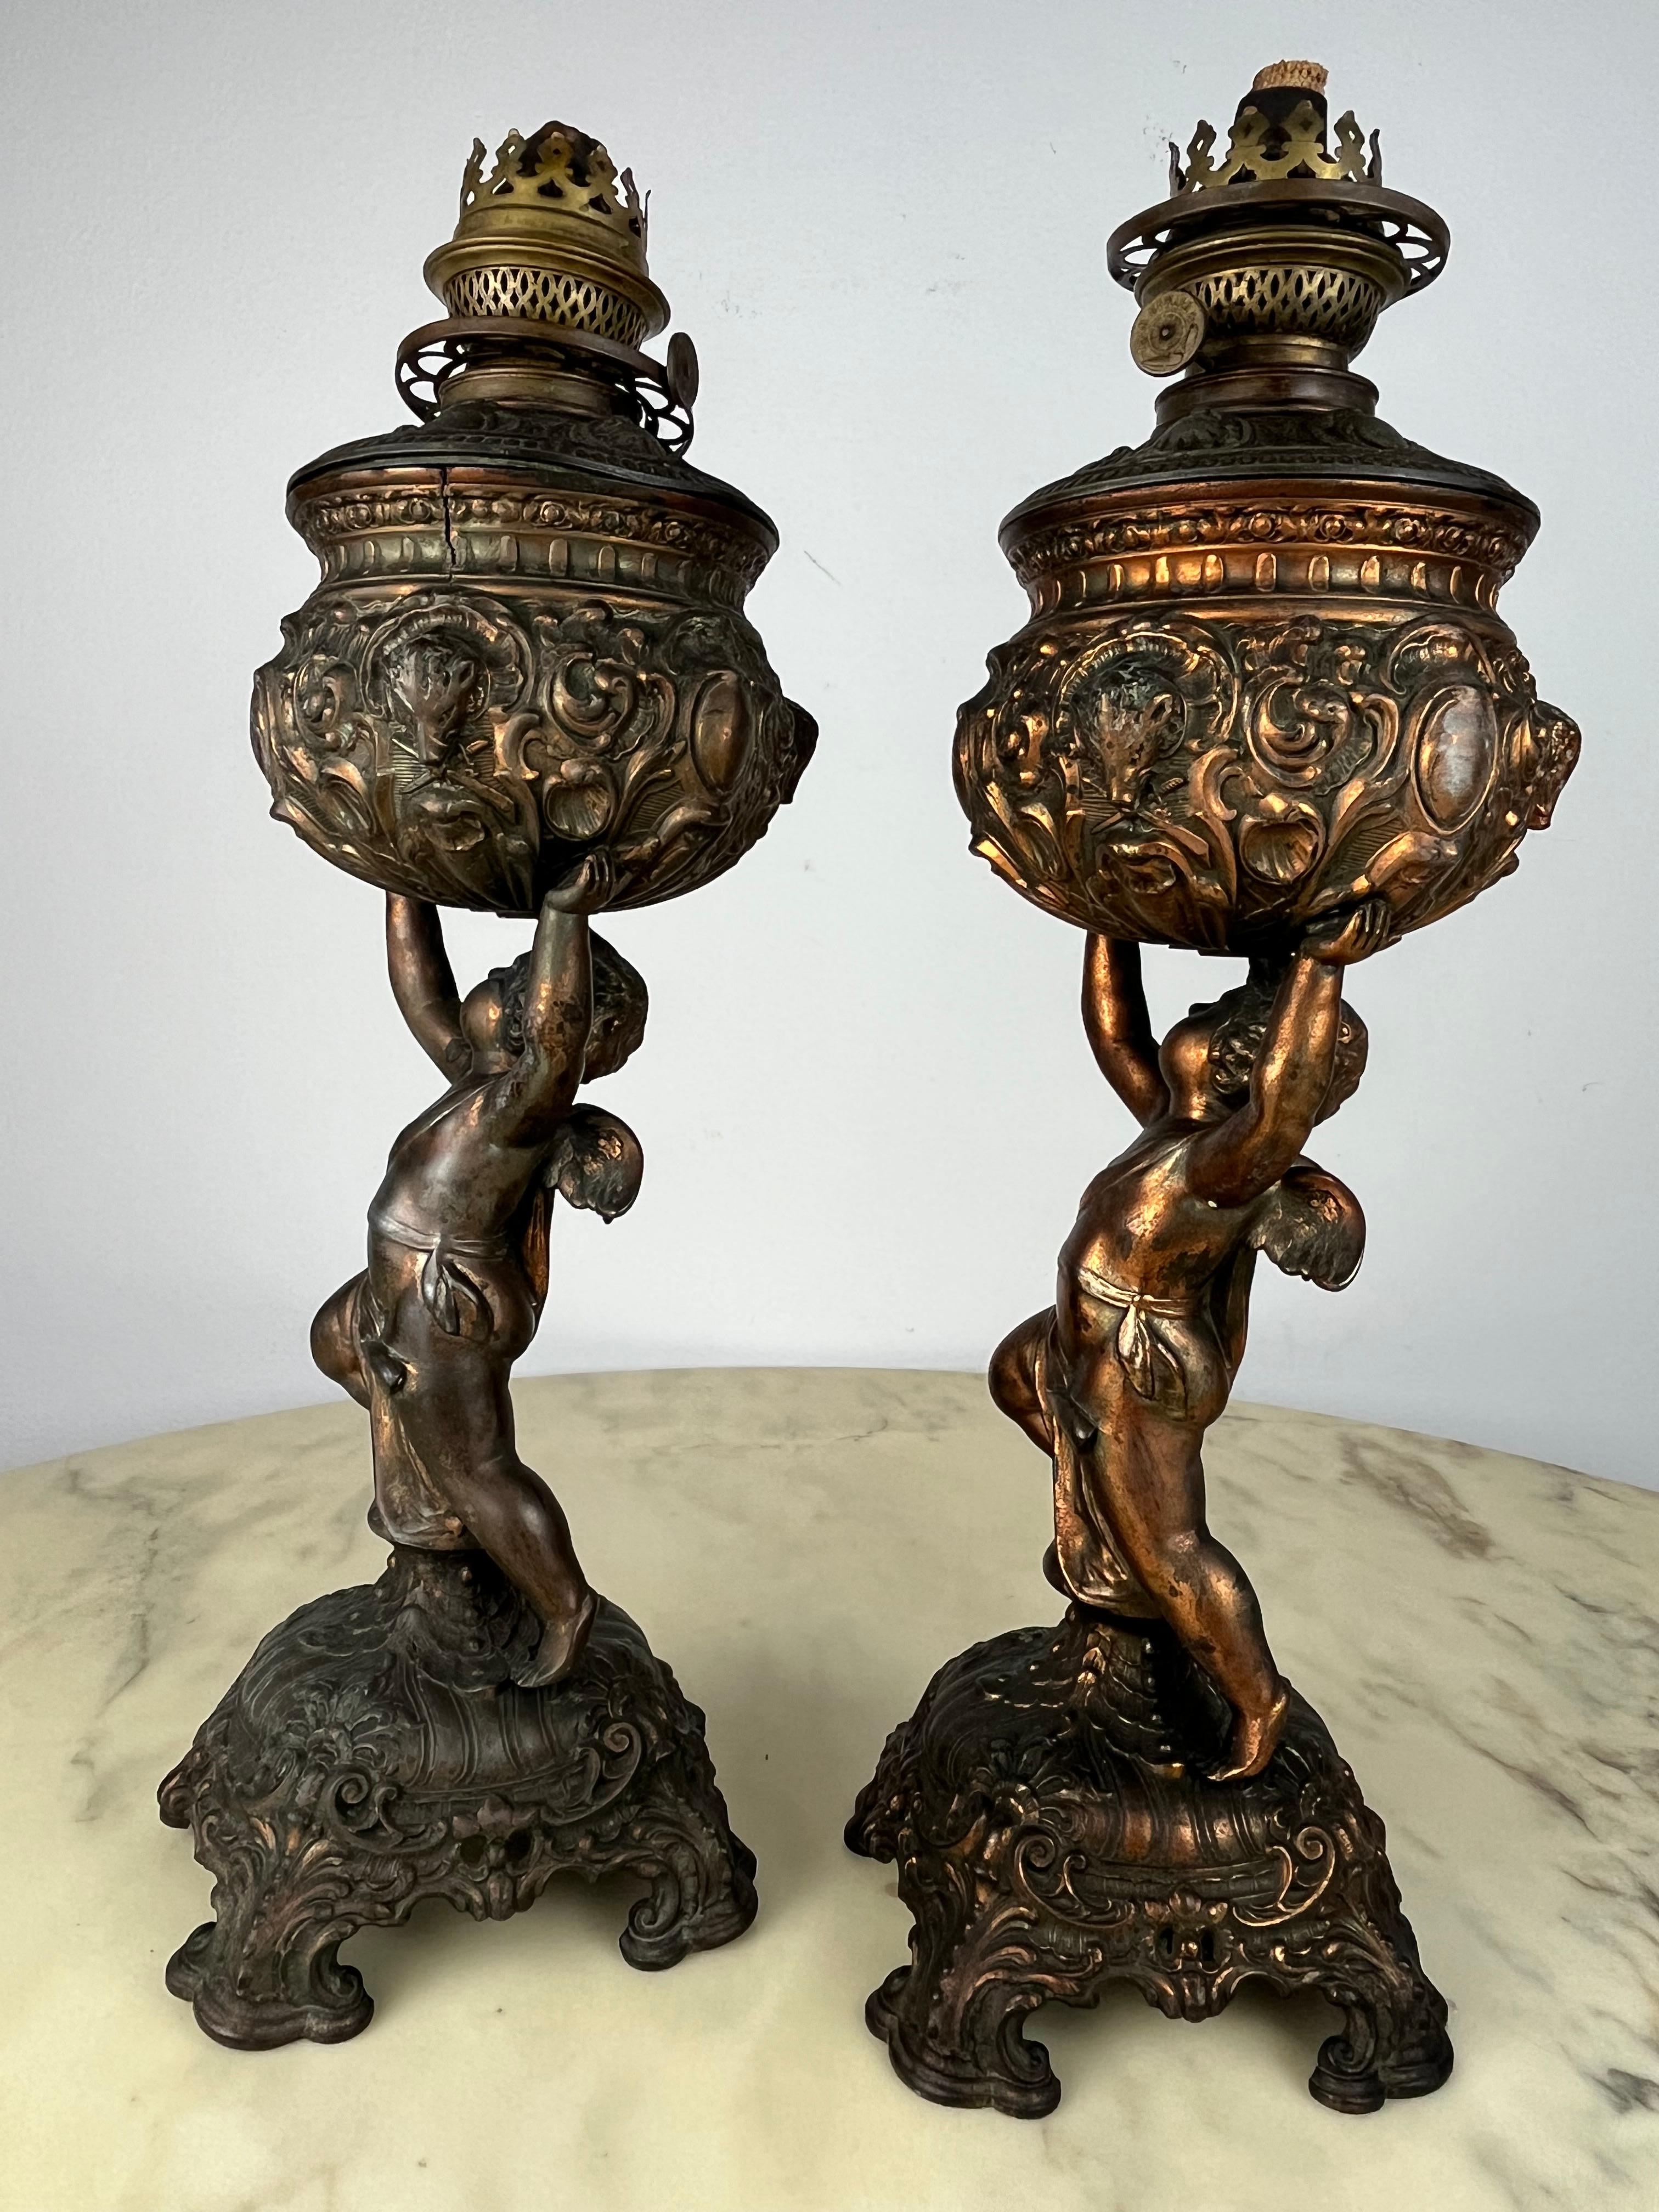 Ancient and original pair of bronze oil lamps, 1930
Belonging to my great-great-grandparents, they are in fair condition. Some glass is missing, as per the attached photographs. One has cracks in the metal.